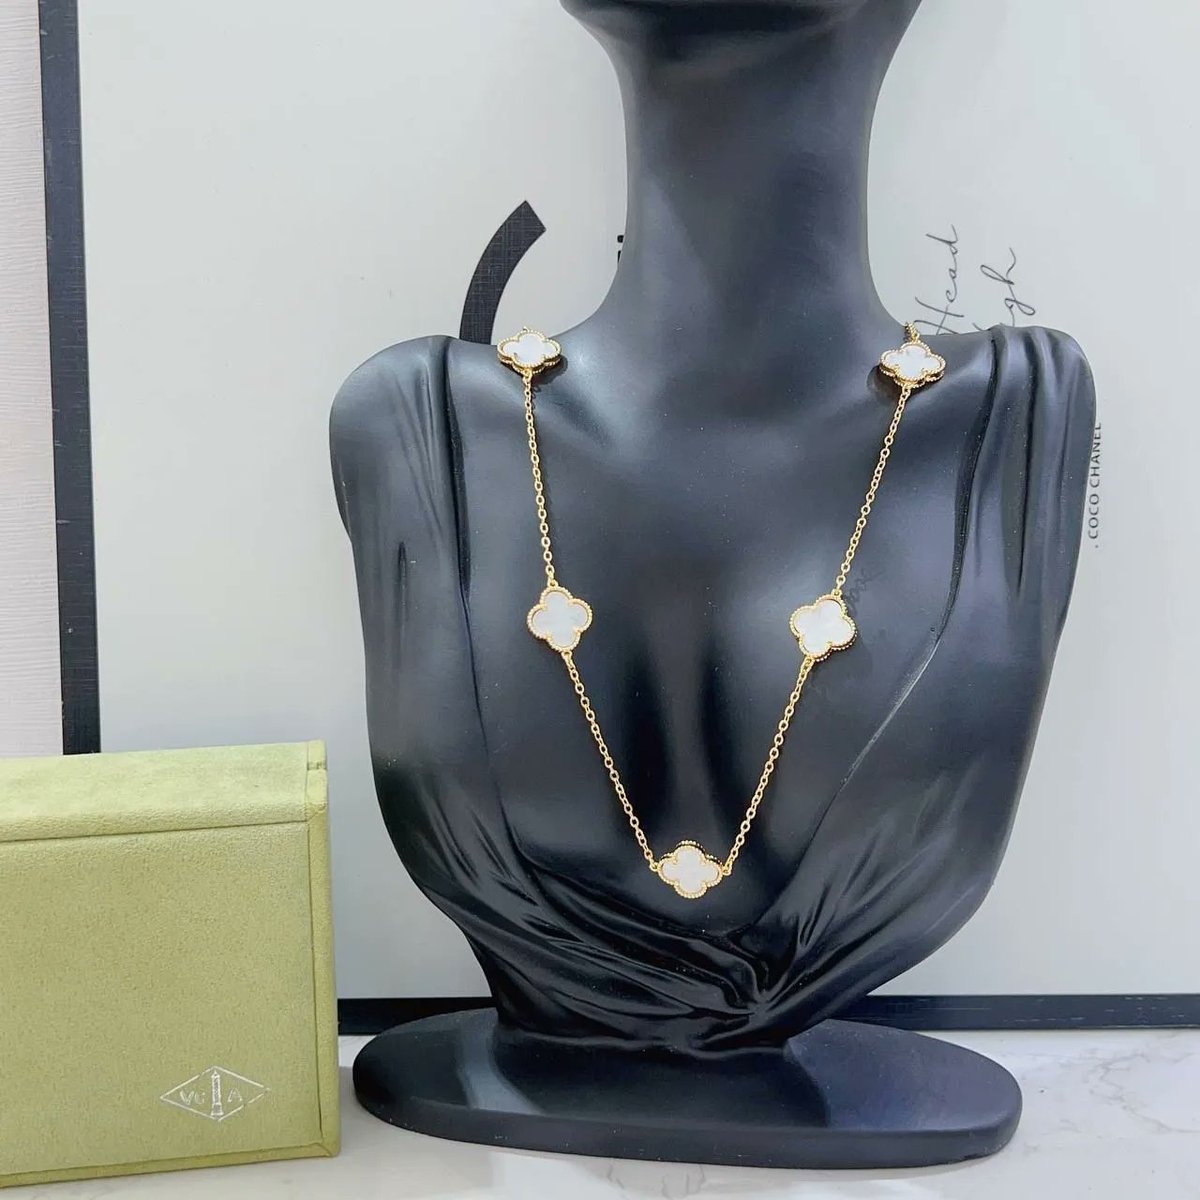 Fashion Necklace Now Available...

Price: #6,500

Kindly Send A Dm To Place An Order...
#ily #fypシ #capcut #foryou #explore #trending #necklace #jewelry #makemefamous #topnotchquality #qteescollections #BBNaijaAllStars #Bbnaija